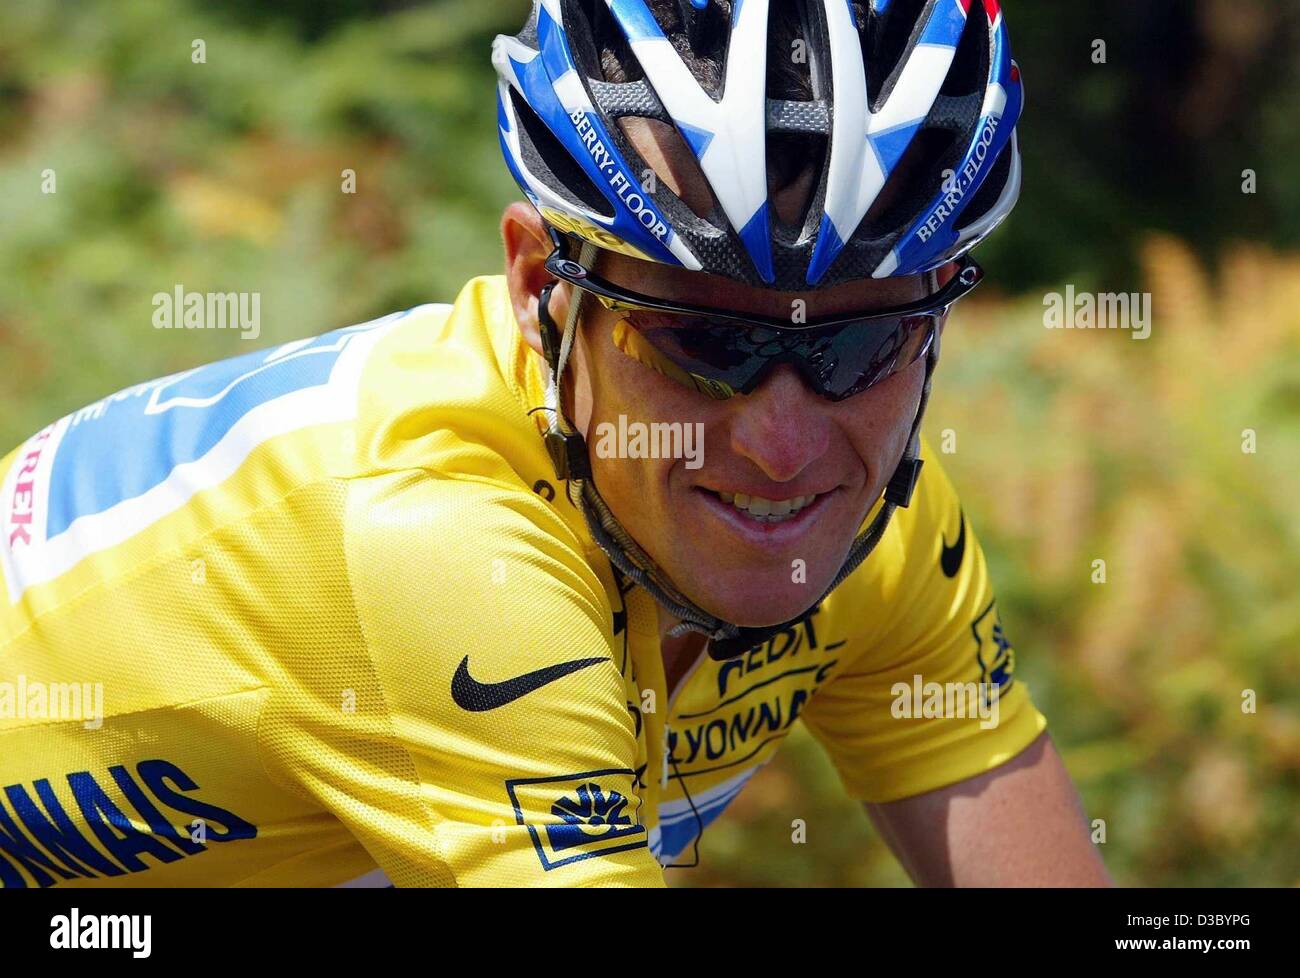 (dpa) - US Postal-Berry Floor's Lance Armstrong from the US, wearing the overall leader's yellow jersey, smiles while racing during the 17th stage of the 2003 Tour de France cycling race from Dax to Bordeaux, France, 24 July 2003. Armstrong still leads the overall standings with a 1:07 min advantage Stock Photo